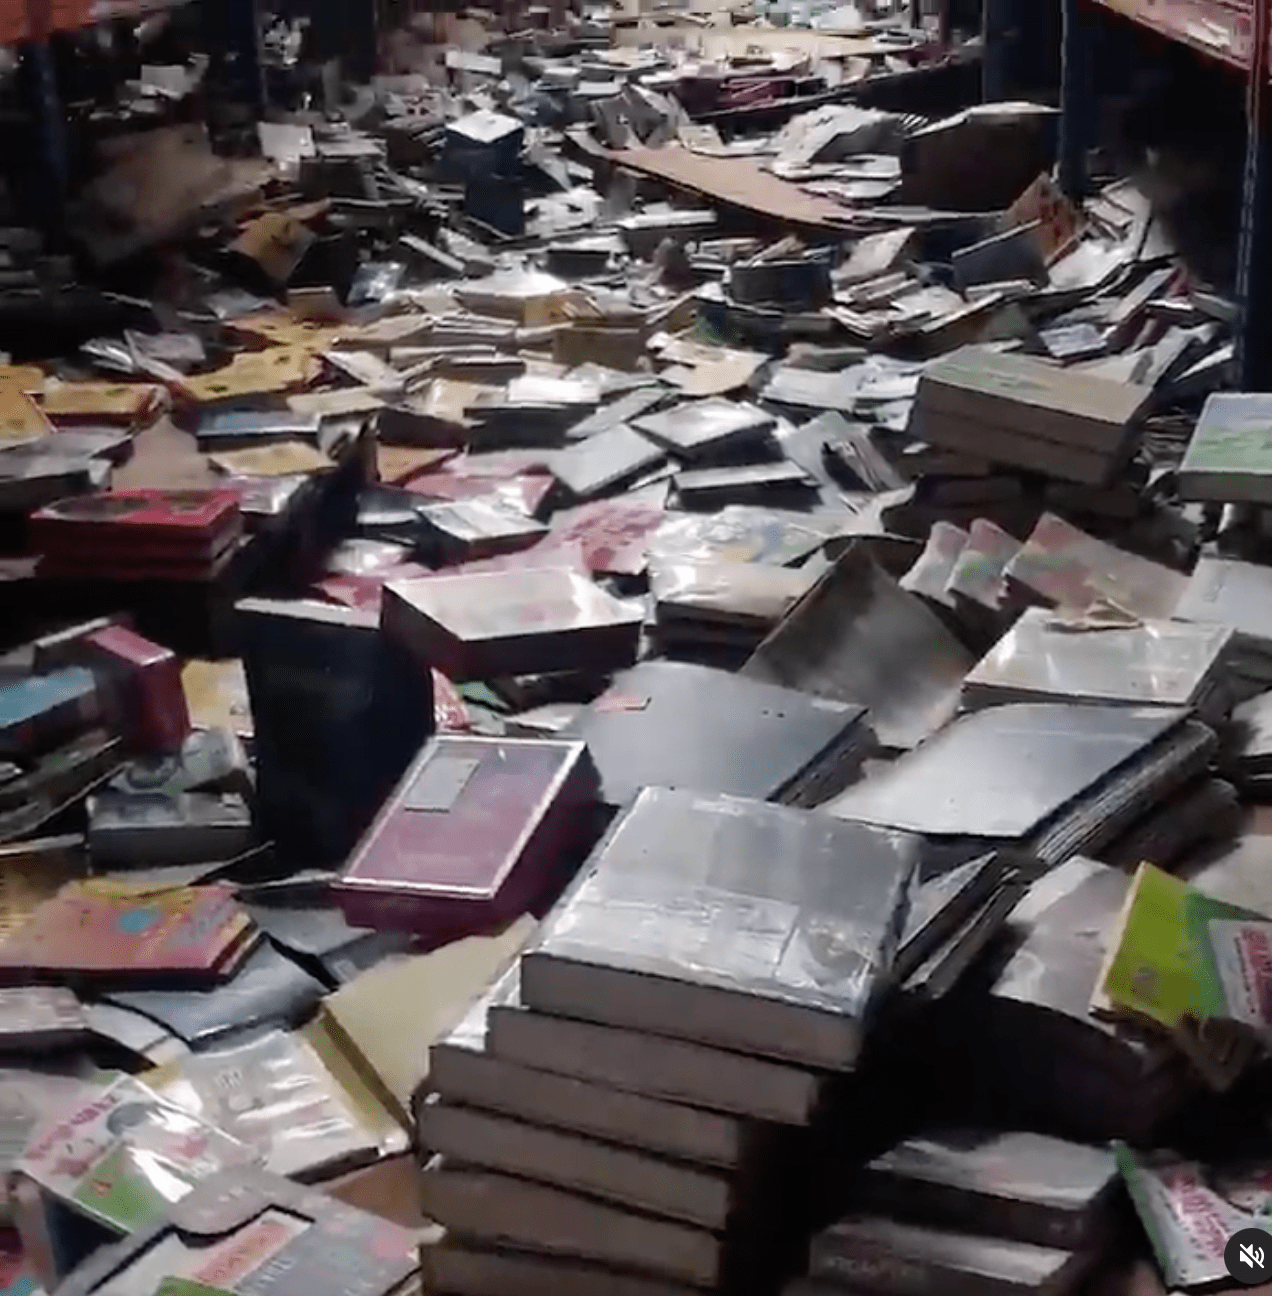 Thousands-of-books-scattering-at-shah-alam-warehouse